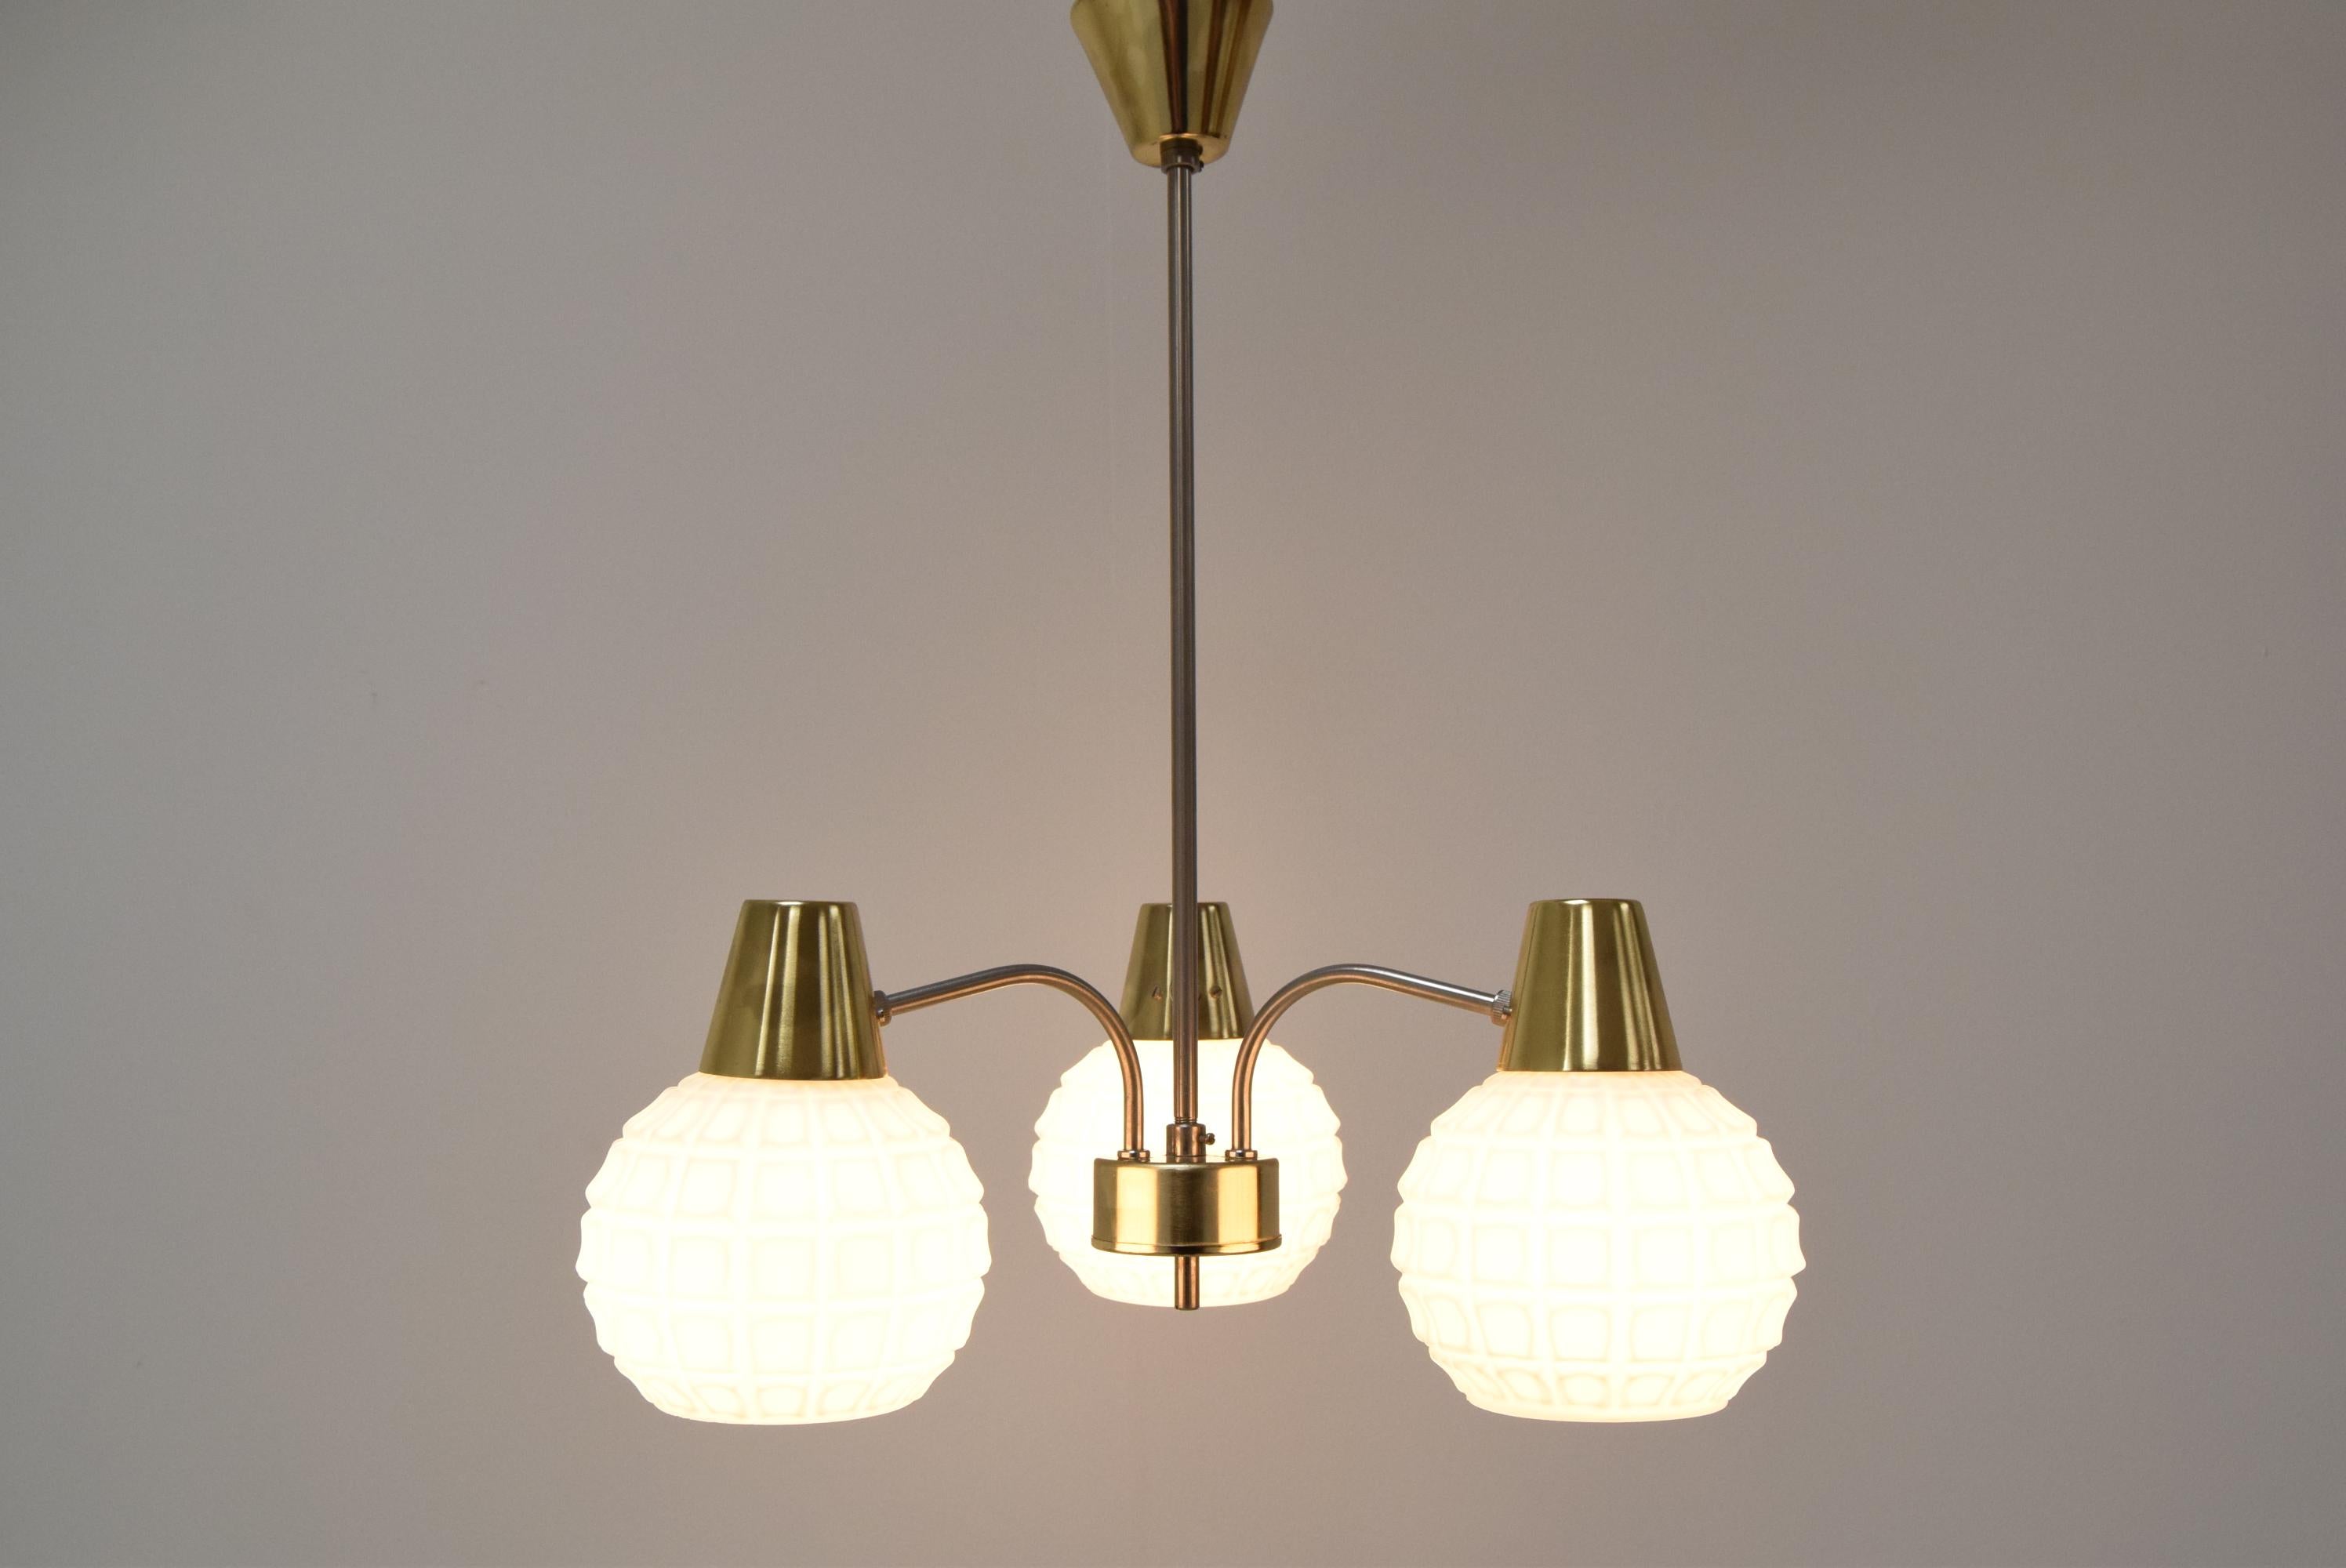 Made in Czechoslovakia
Made of glass, brass
3x E27 or E26 bulb
With aged patina
Re-polished
Fully functional
Good original condition
US wiring compatible.